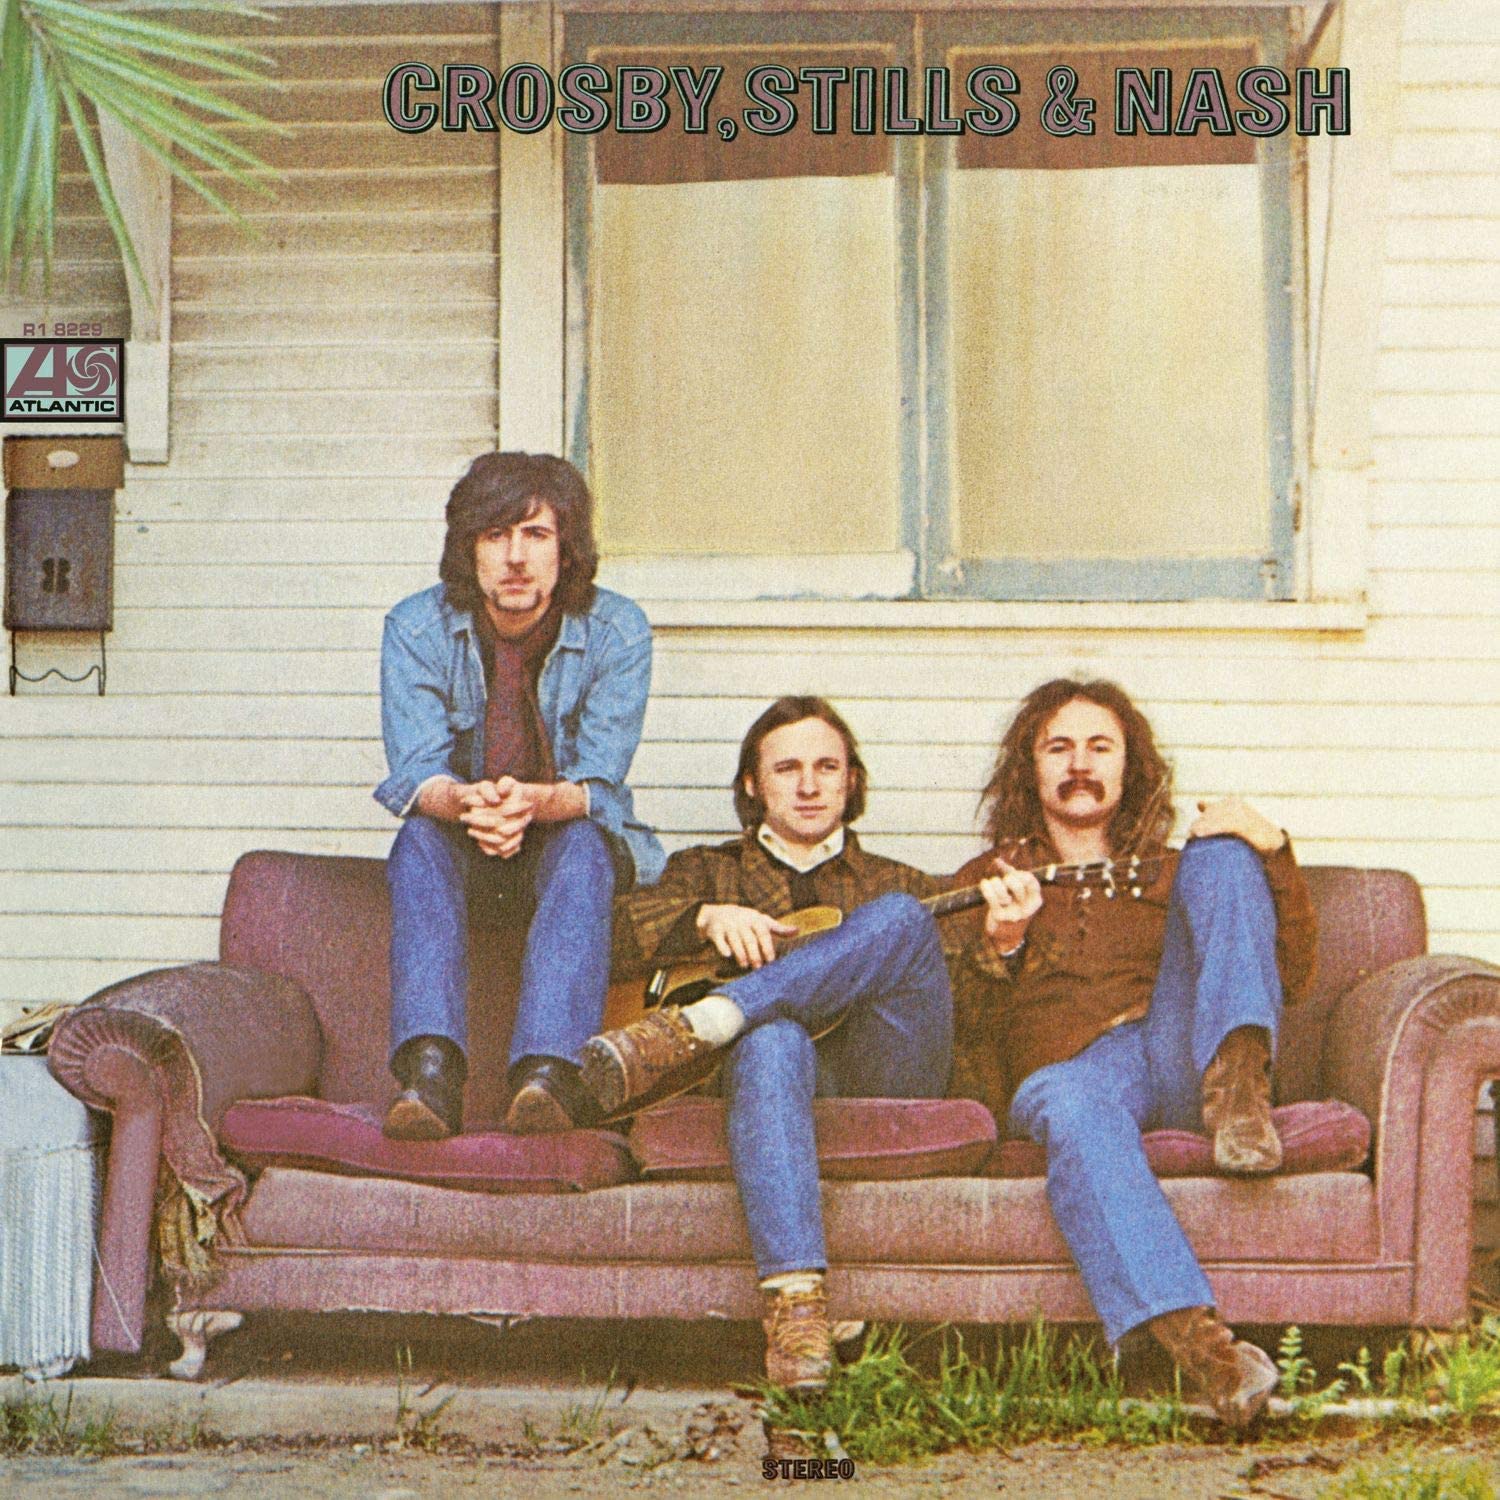 The first album on Vinyl by Crosby, Stills and Nash. Features the singles 'Marrakesh Express' and 'Suite: Judy Blue Eyes'.